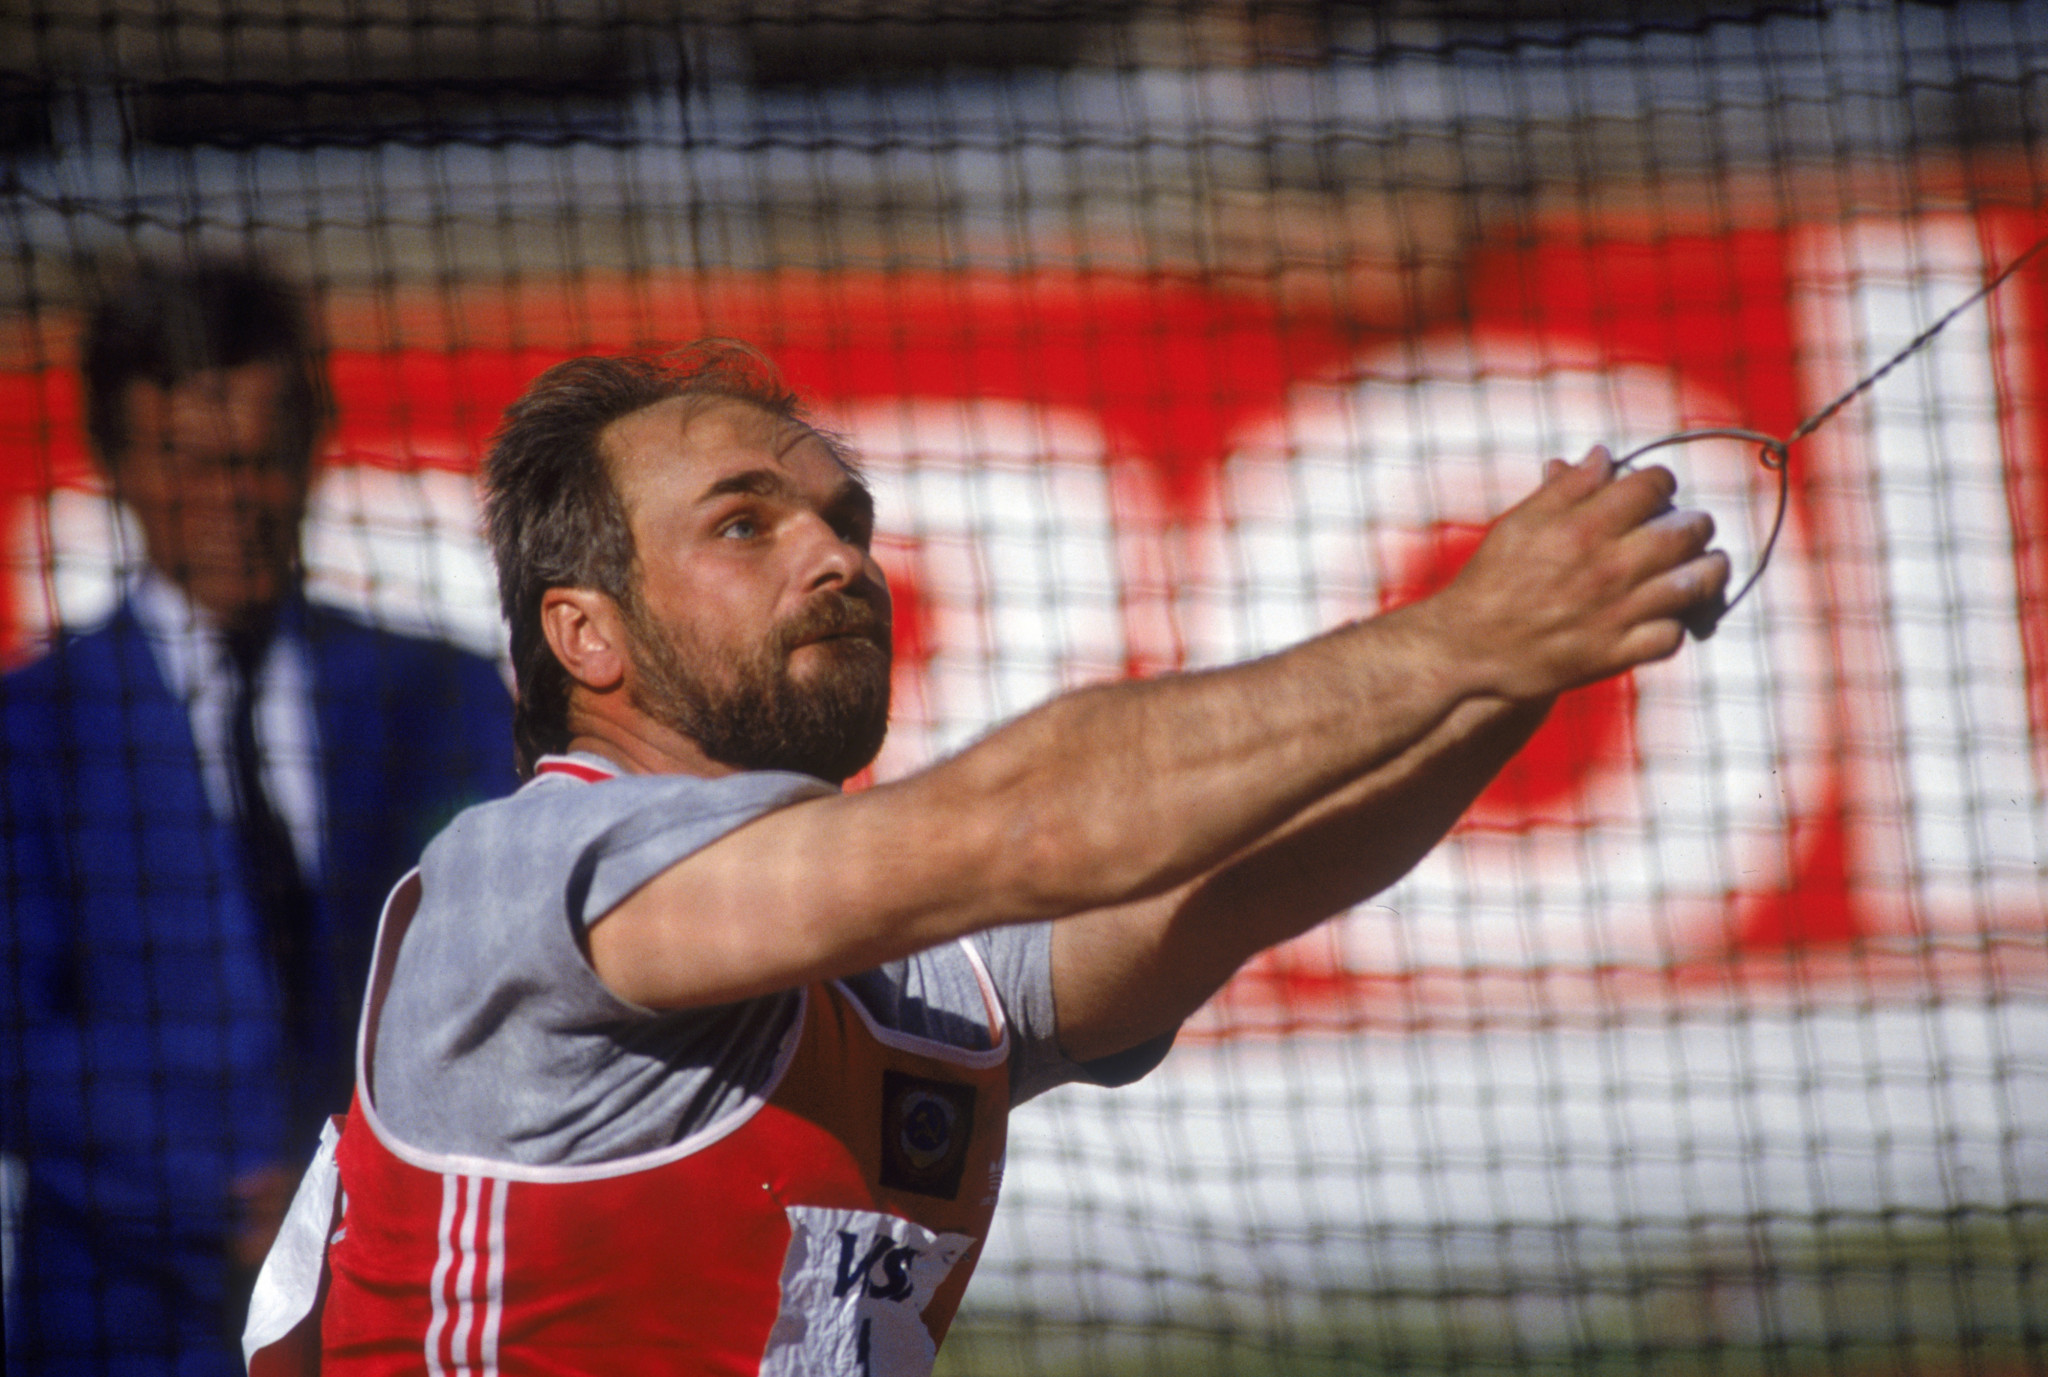 Double Olympic hammer gold medallist Yuri Sedykh won gold at Friendship 84 with a much longer throw than the 1984 Olympic gold medallist ©Getty Images